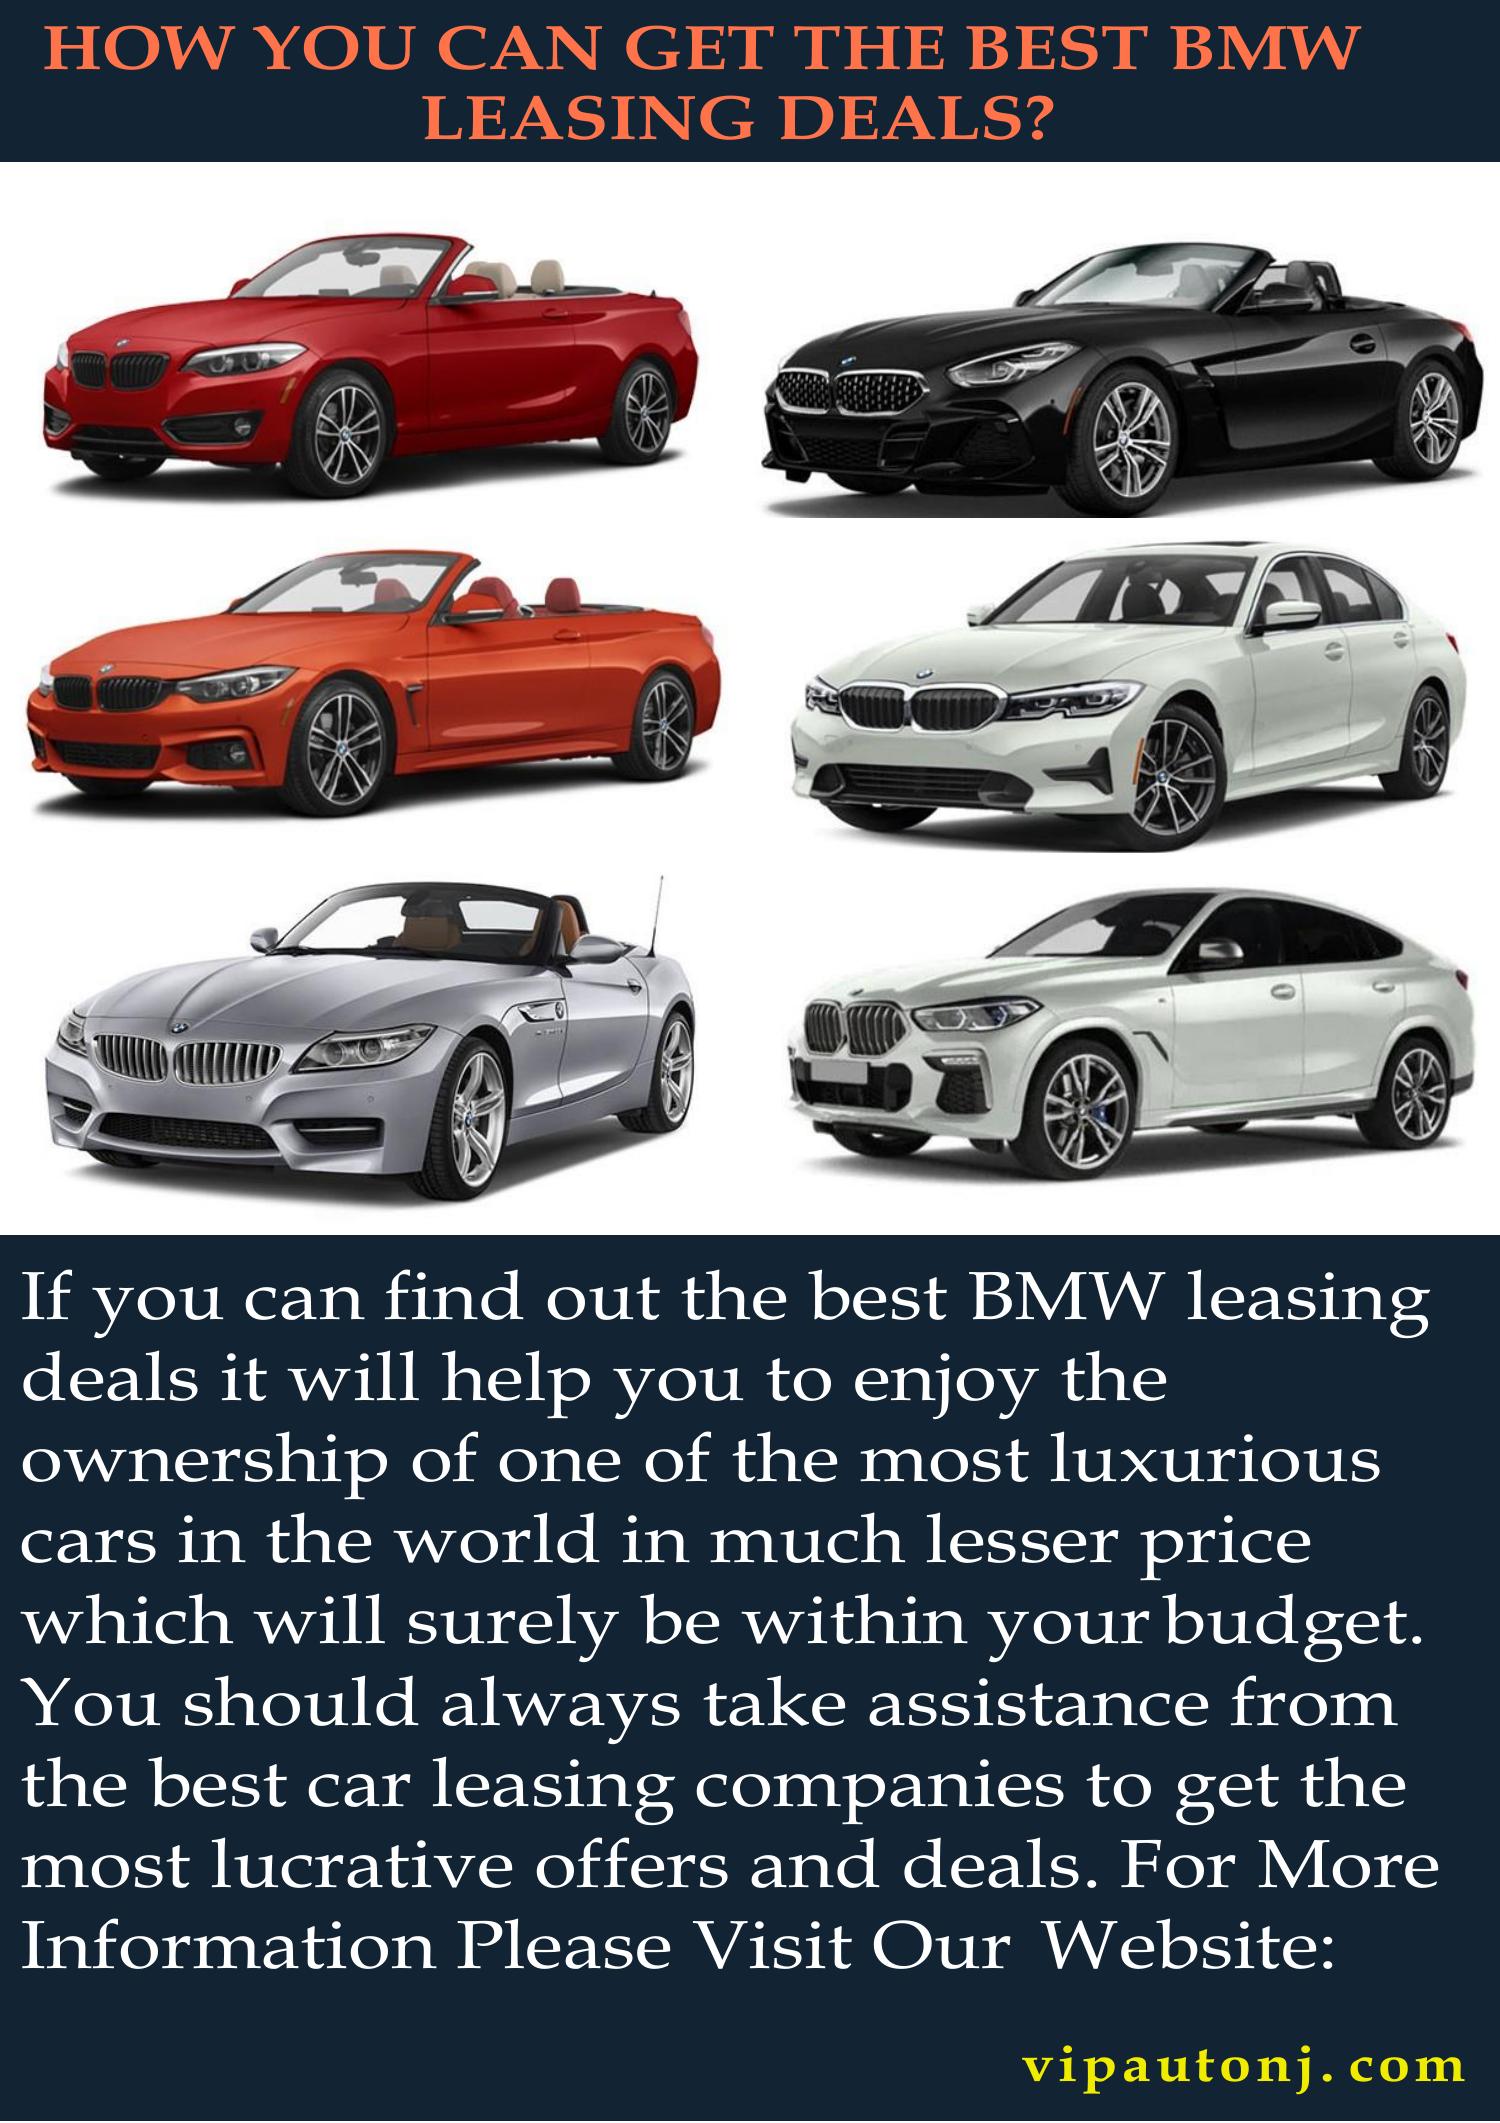 how-you-can-get-the-best-bmw-leasing-deals-docx-docdroid